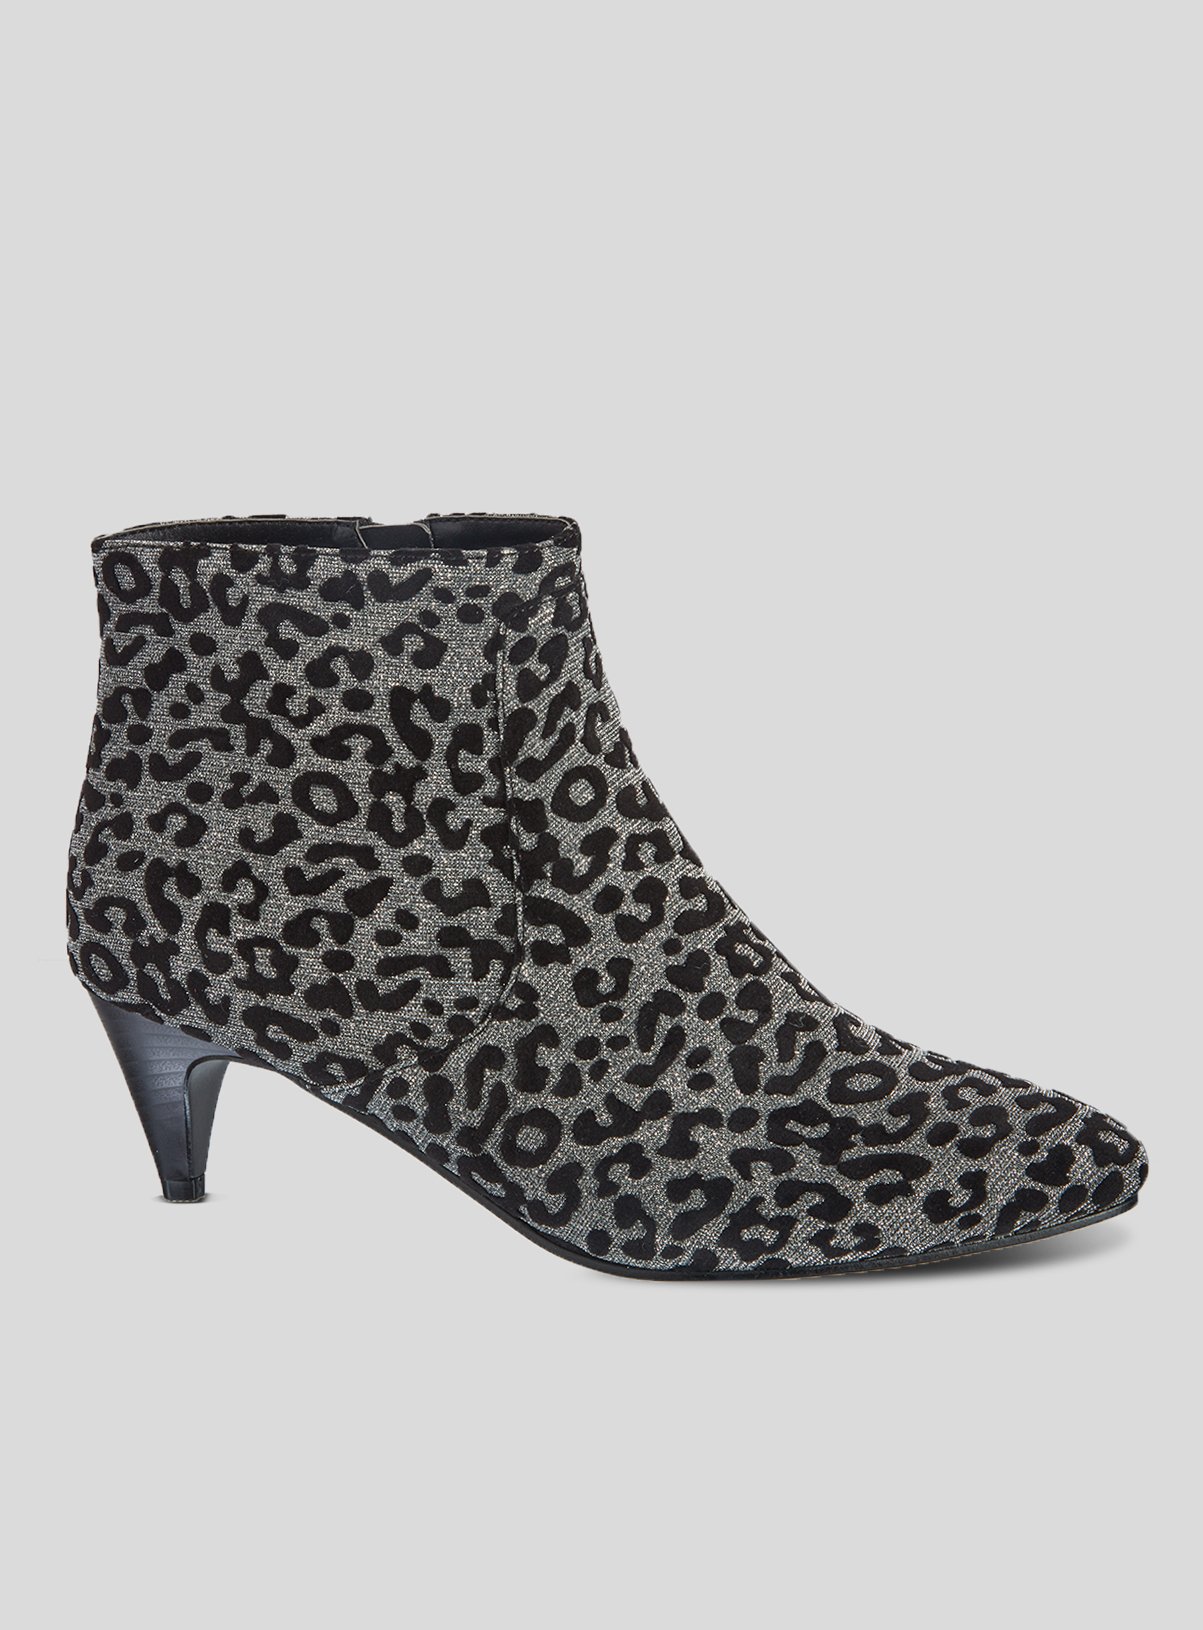 black and white animal print boots